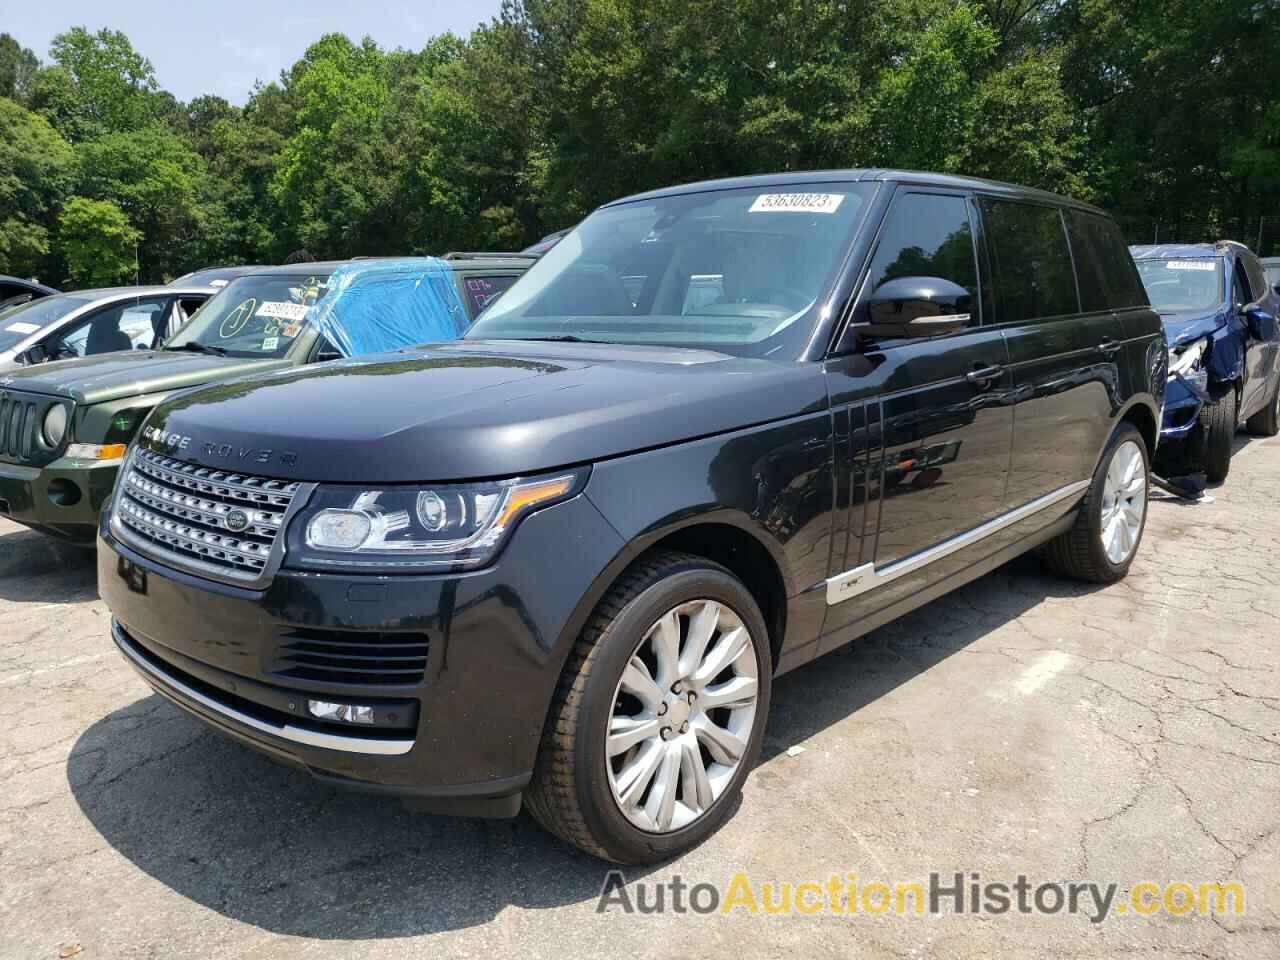 2014 LAND ROVER RANGEROVER SUPERCHARGED, SALGS3TF9EA172791